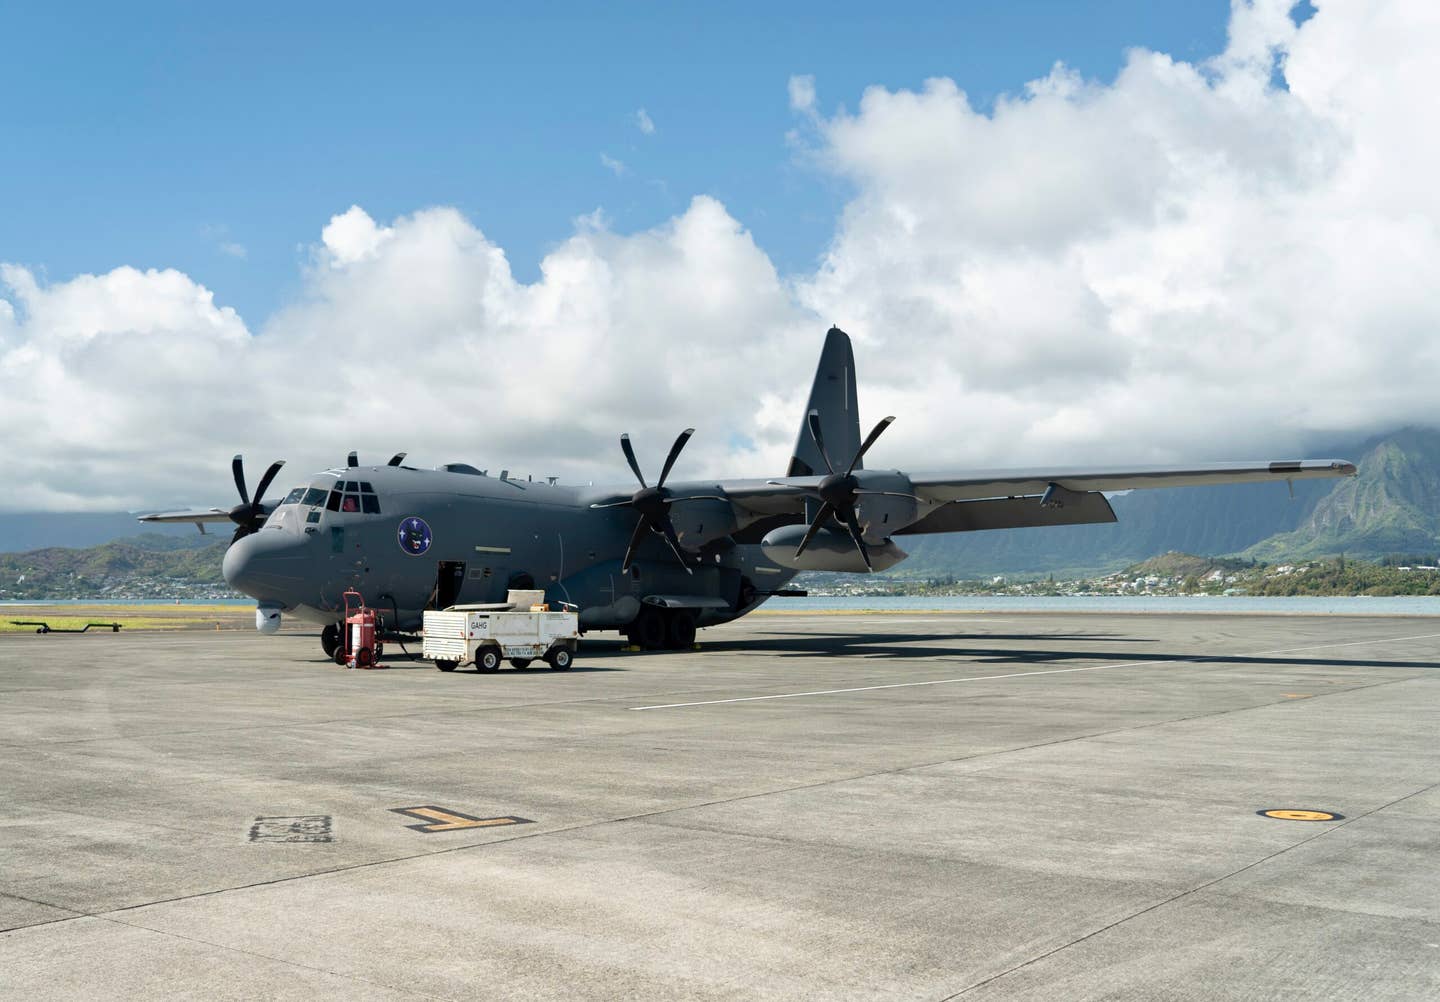 An AC-130J Ghostrider gunship with the new 105mm howitzer from the 17th Special Operations Squadron at Kaneohe Bay, Hawaii, on August 17, 2022. <em>USAF</em>